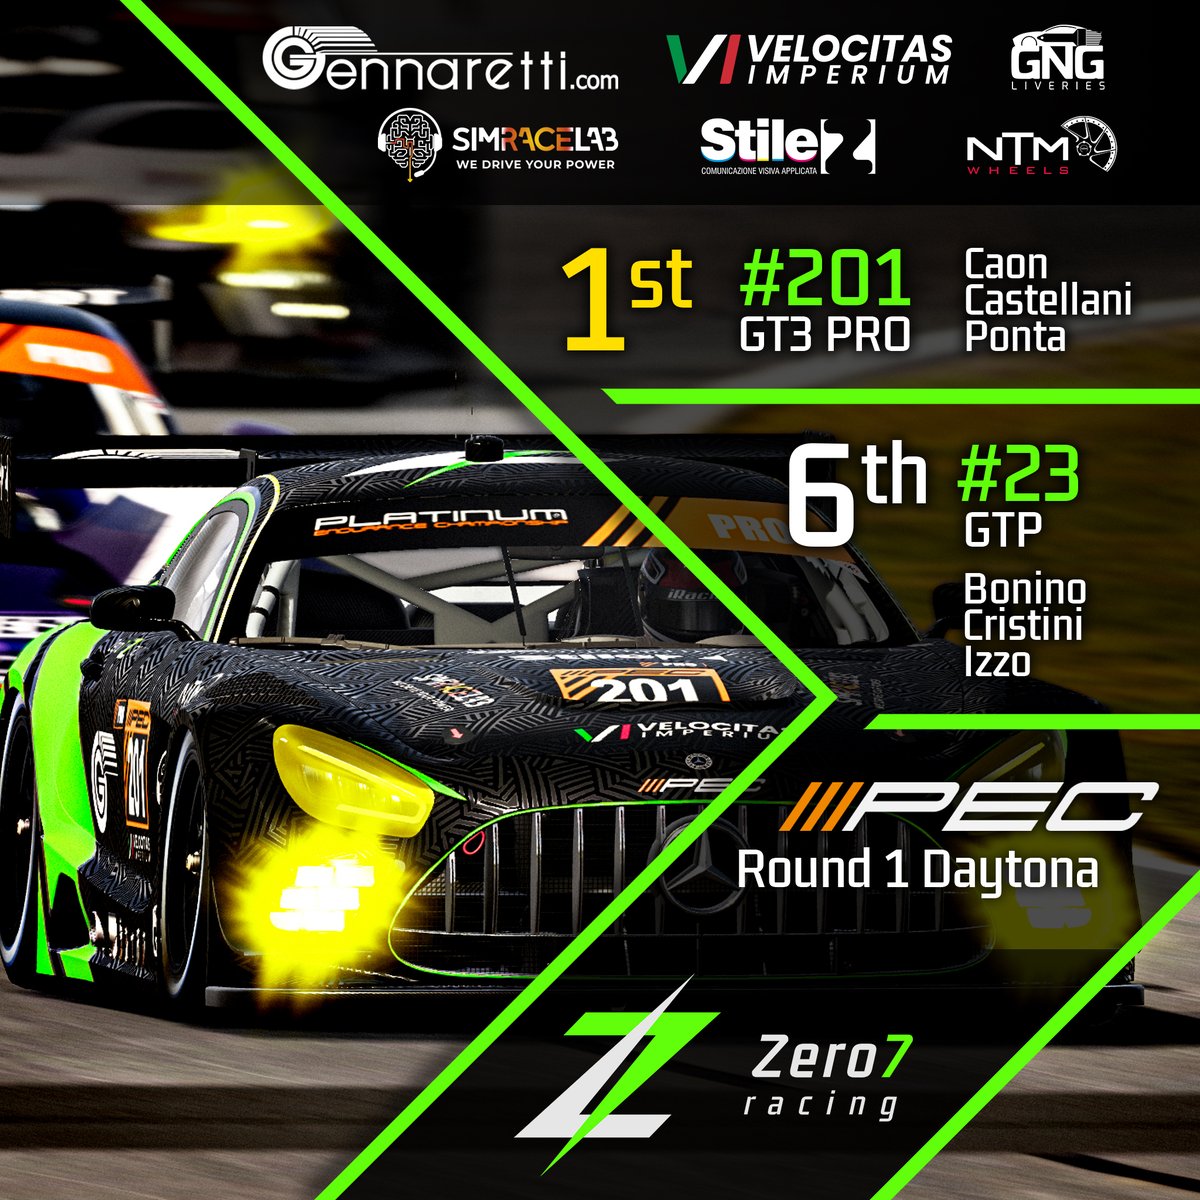 In the first round of the new season of PEC, the GT3 Pro team with Caon, Castellani and Ponta clinched victory right away. It was a tough day at Daytona, however, for the GTP team of Bonino, Cristini and Izzo, facing complicated qualifications, penalties and various mishaps.